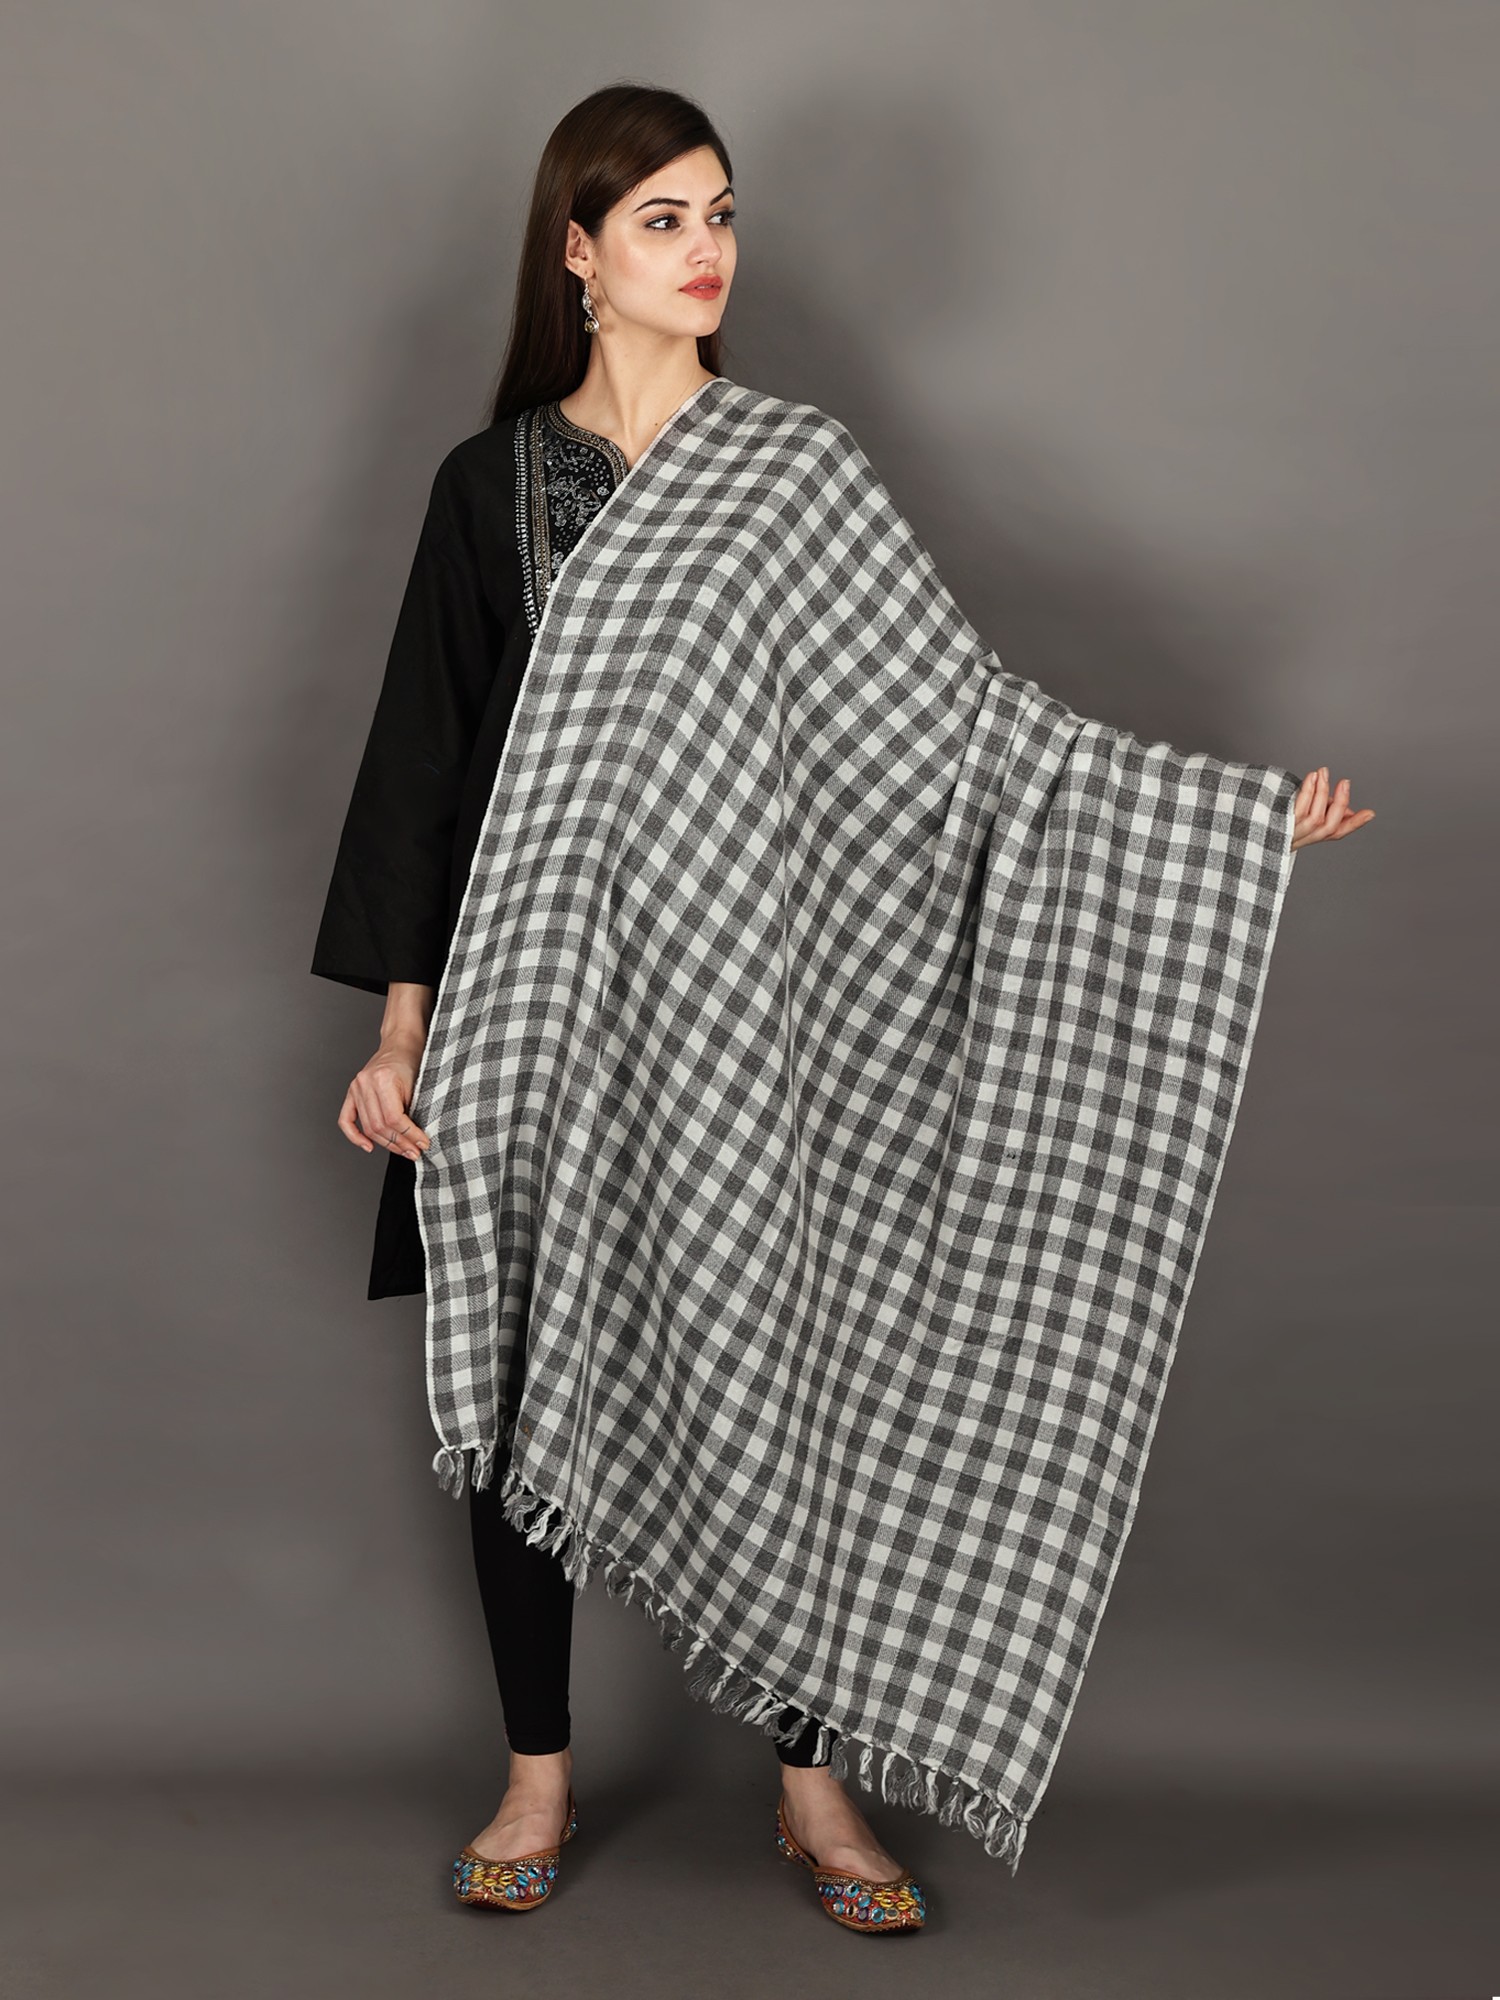 Black and White Check Pattern Handwoven Pure Wool Shawl From ...